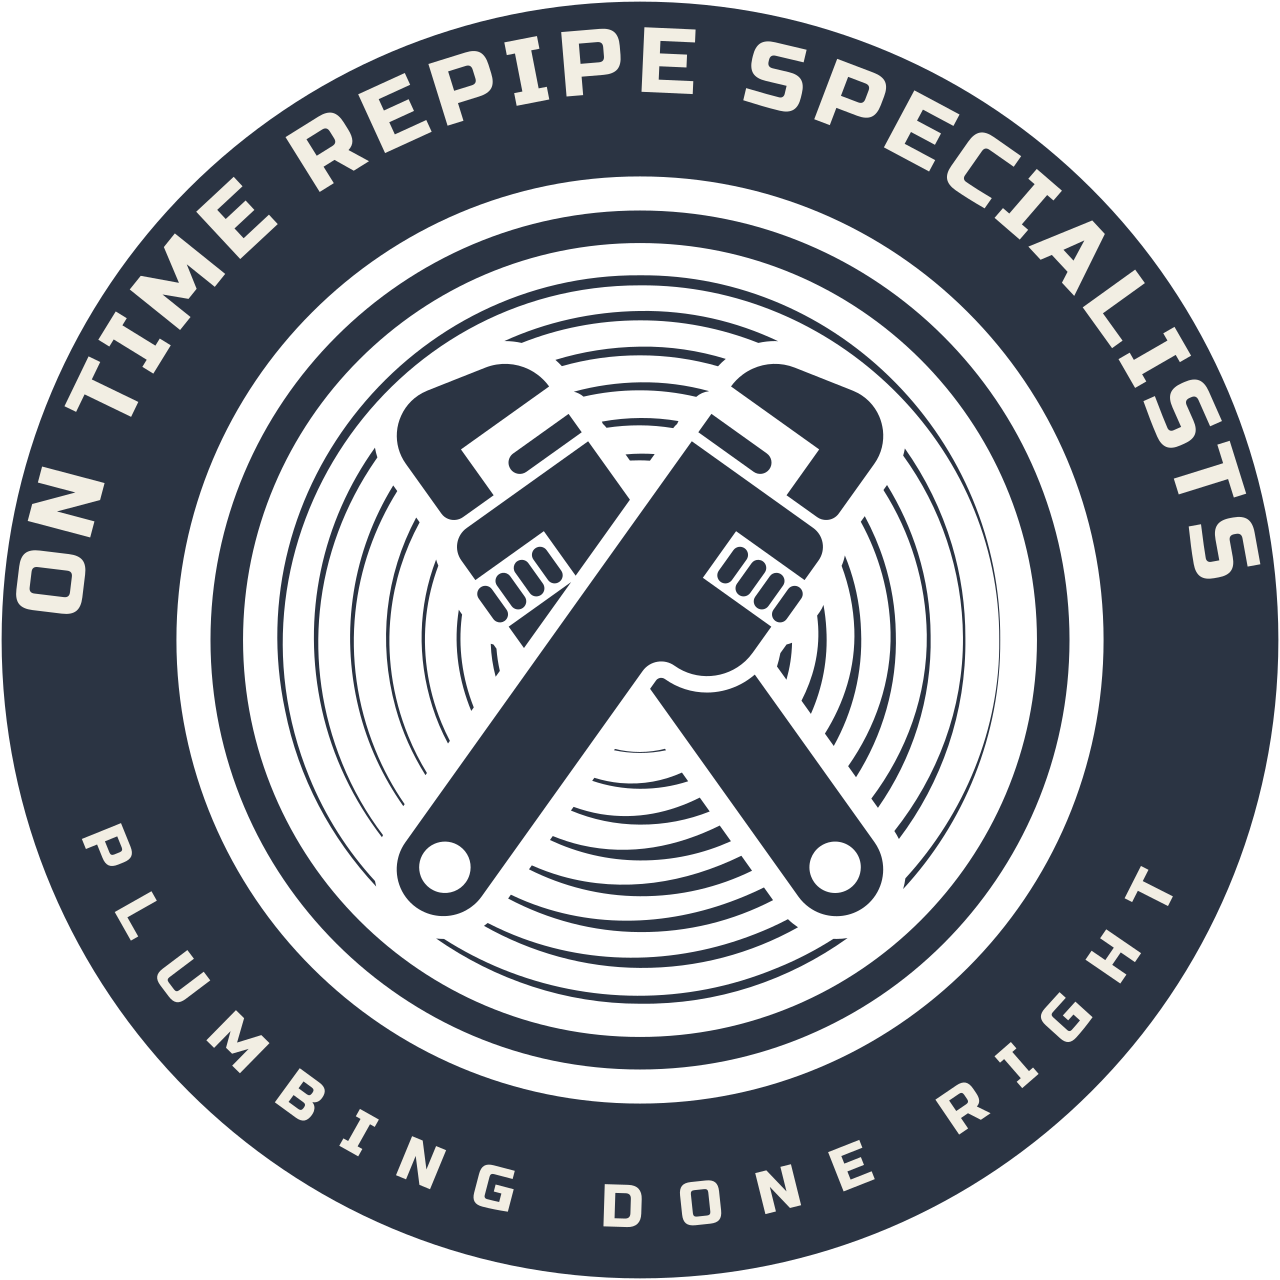 ON TIME REPIPE SPECIALISTS's logo